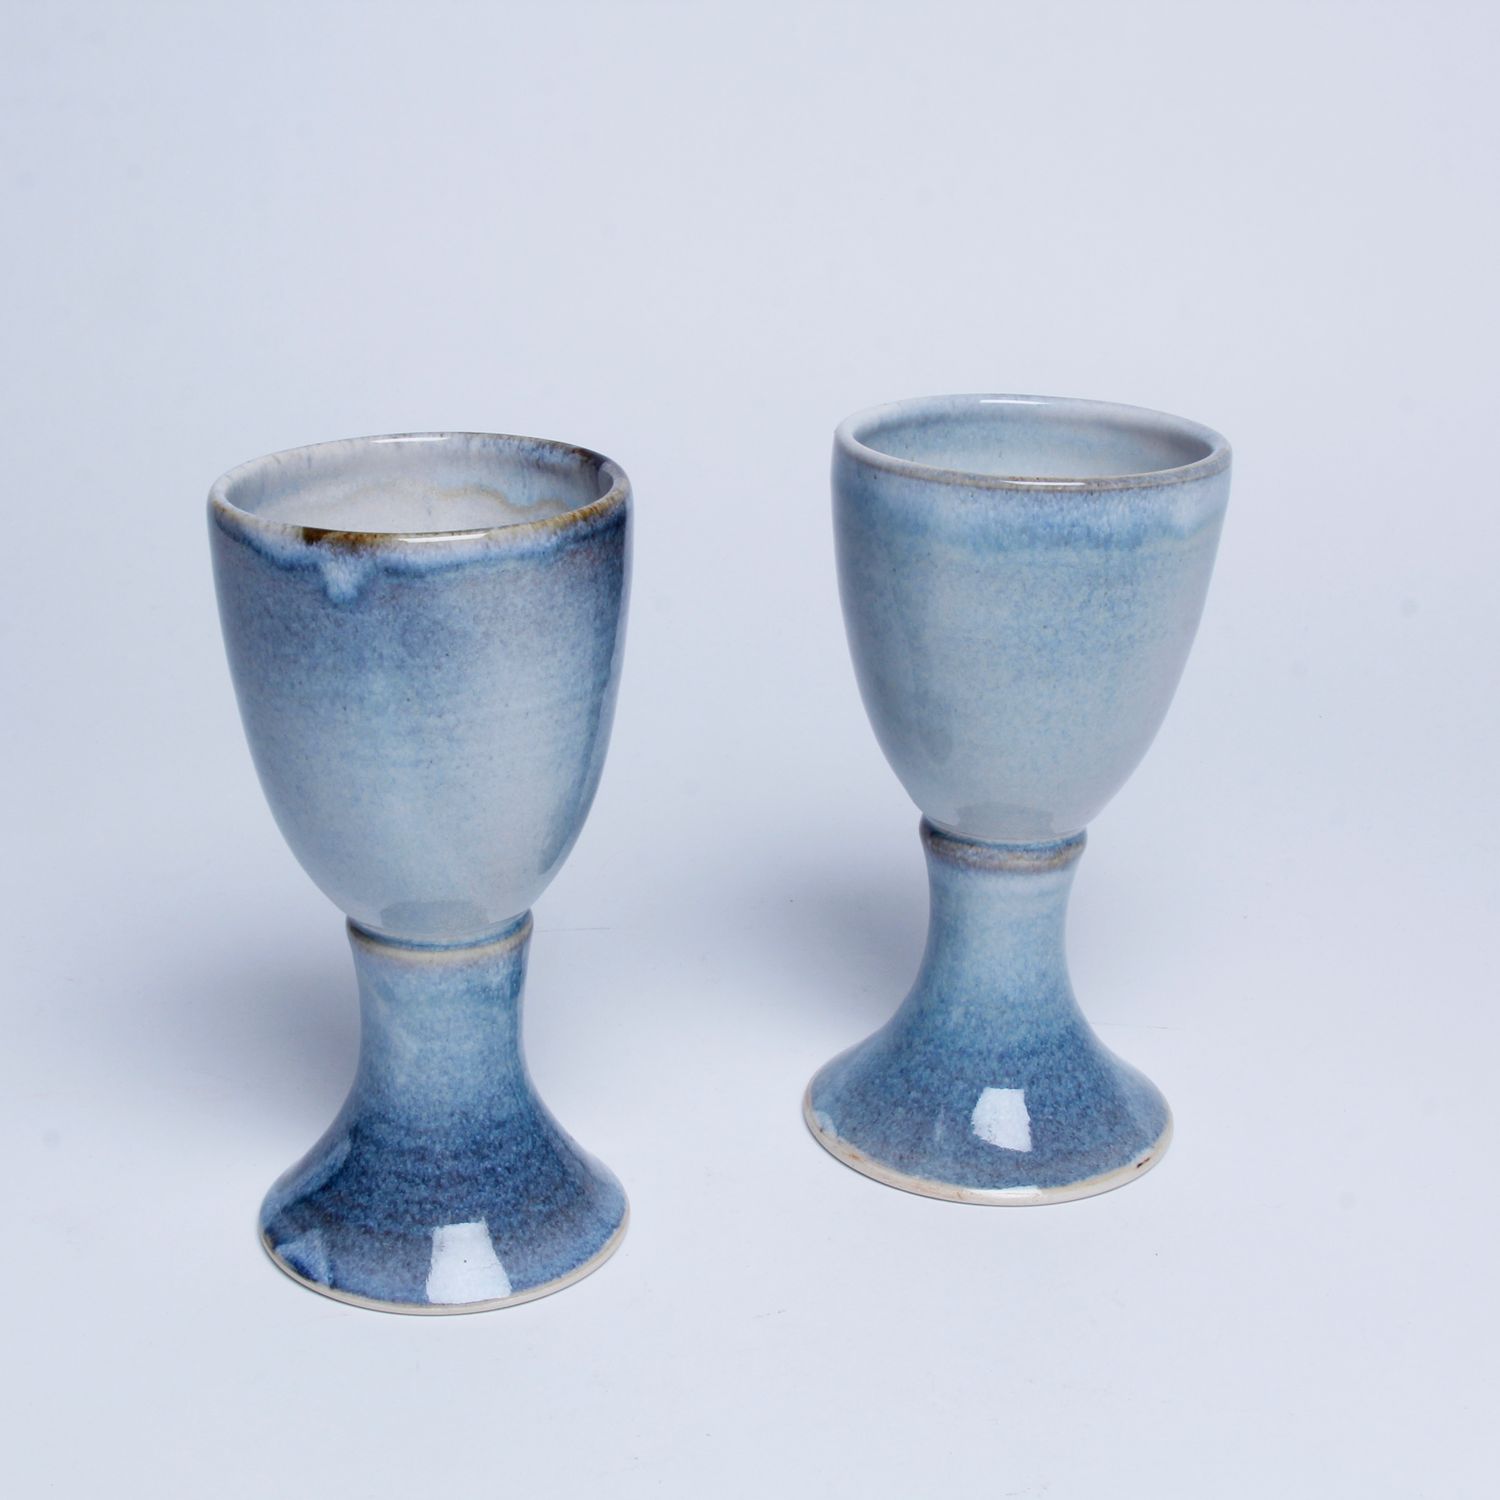 Teresa Dunlop: Goblet (Each sold separately) Product Image 1 of 3